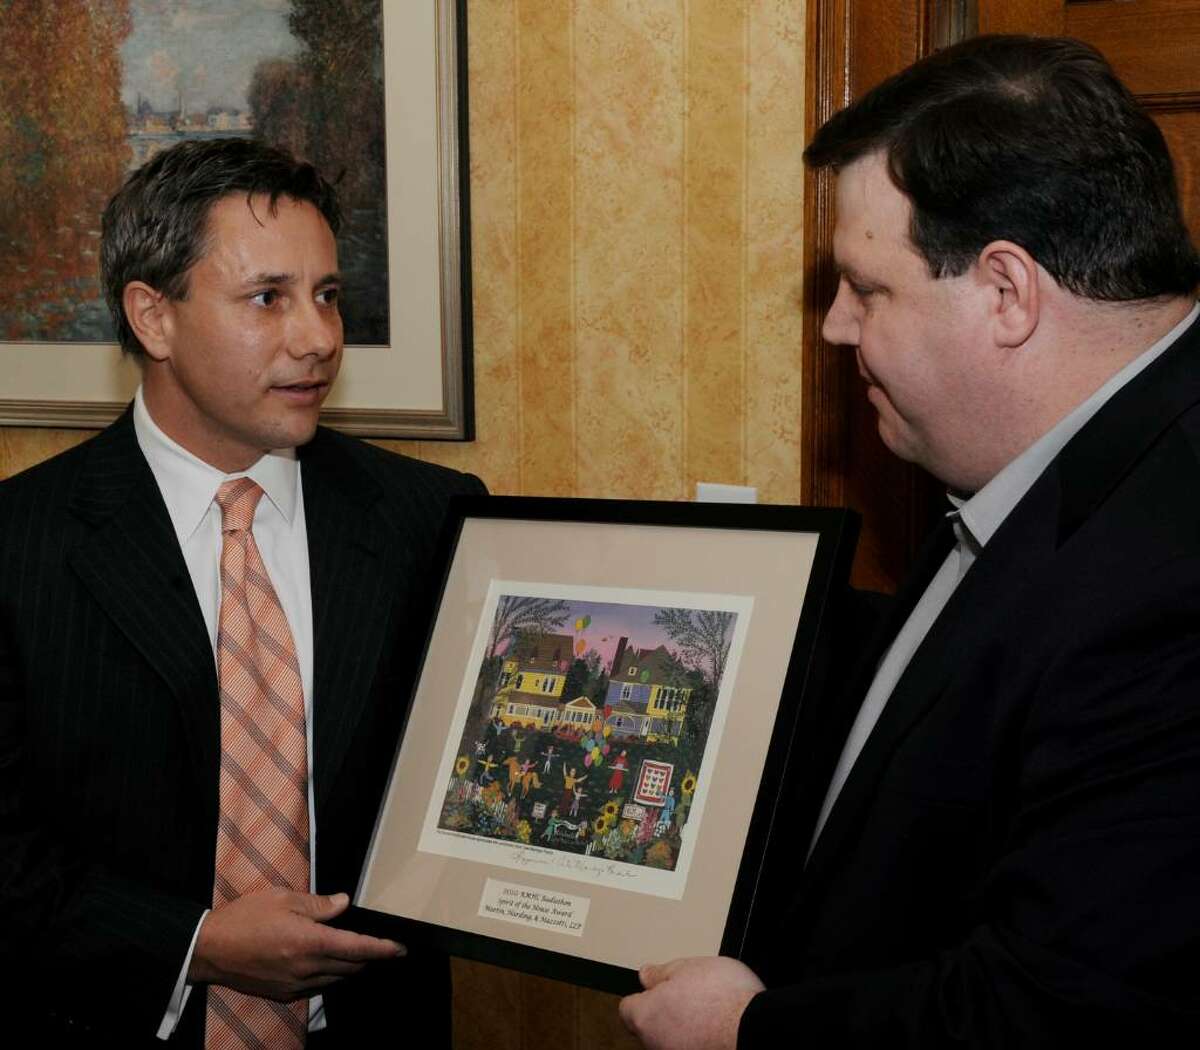 Paul Harding, left, of Martin, Harding and Mazotti law firm receives the first "Spirit of the House" award from Jeff Yule, executive director of the Ronald McDonald House in Albany on Jan. 8. (Skip Dickstein / Times Union)